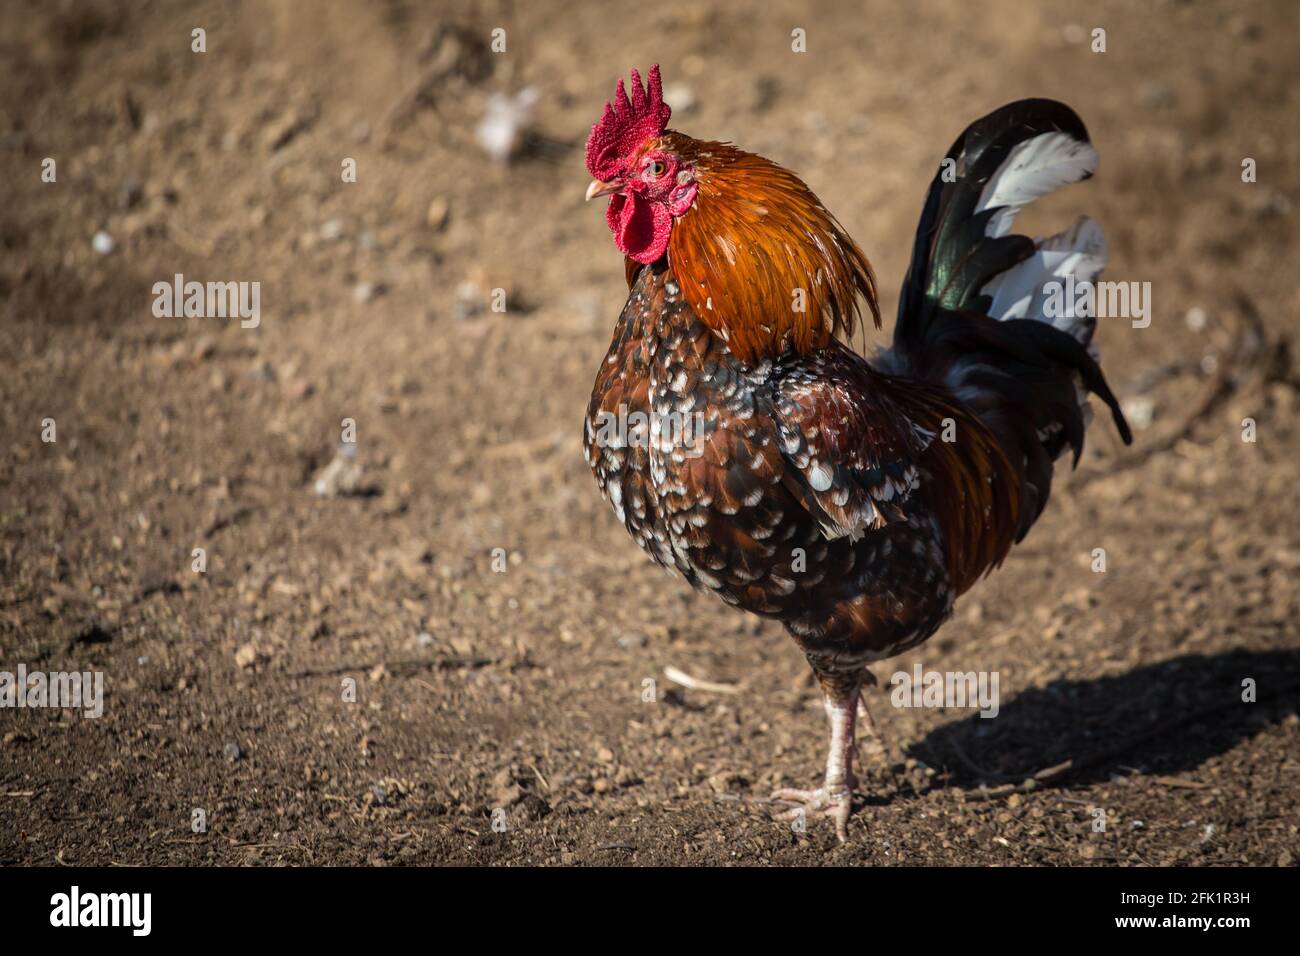 Stoapiperl/ Steinhendl rooster, a critically endangered chicken breed from Austria Stock Photo